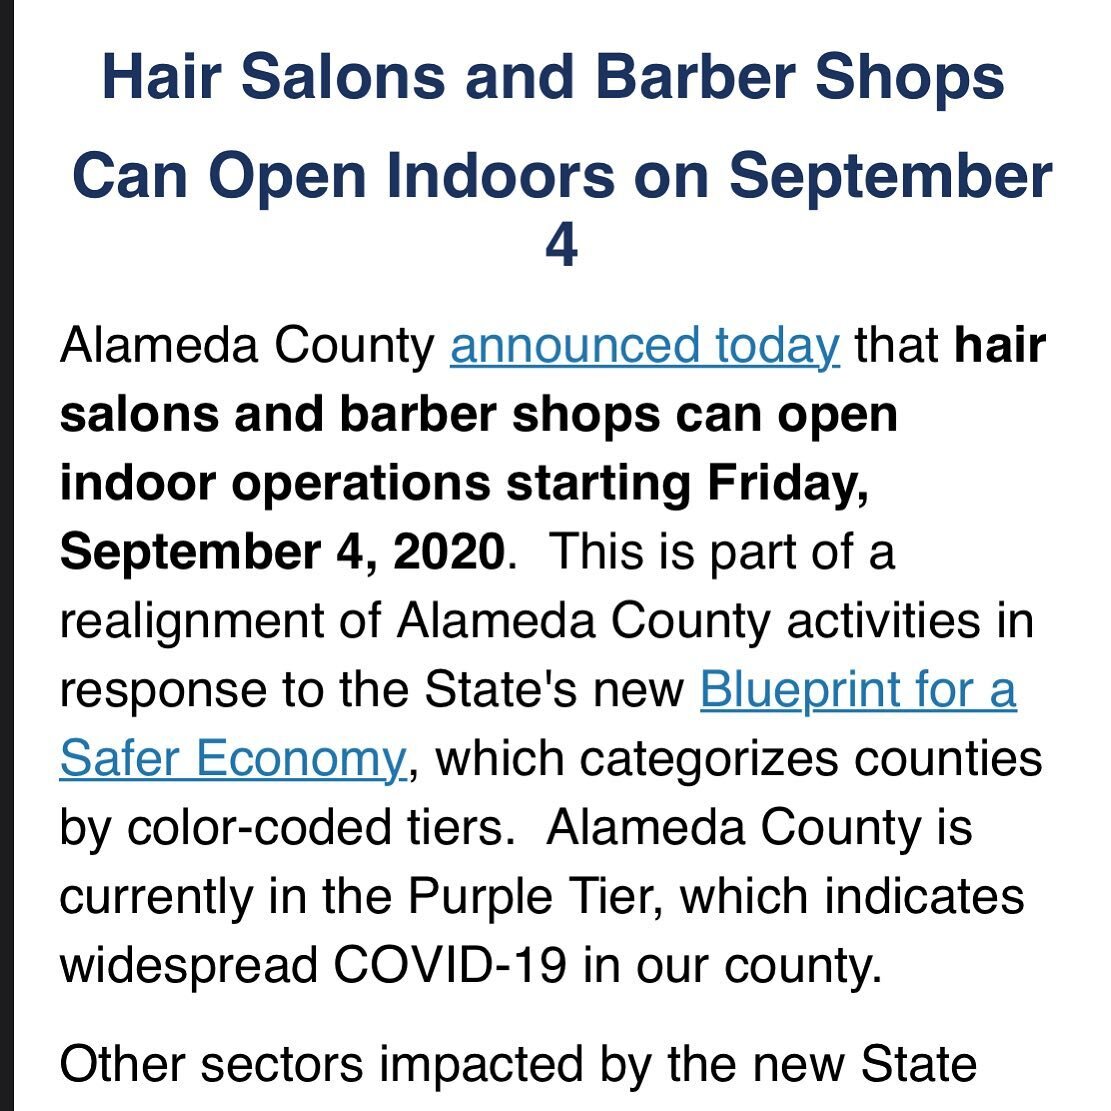 Good news. This was just announced. We will not be reopening on 9/4 but will shortly after.

We are combing through the new rules and regulations that were updated on 9/1 to keep our clients and barbers safe while being compliant.

Thank you for your